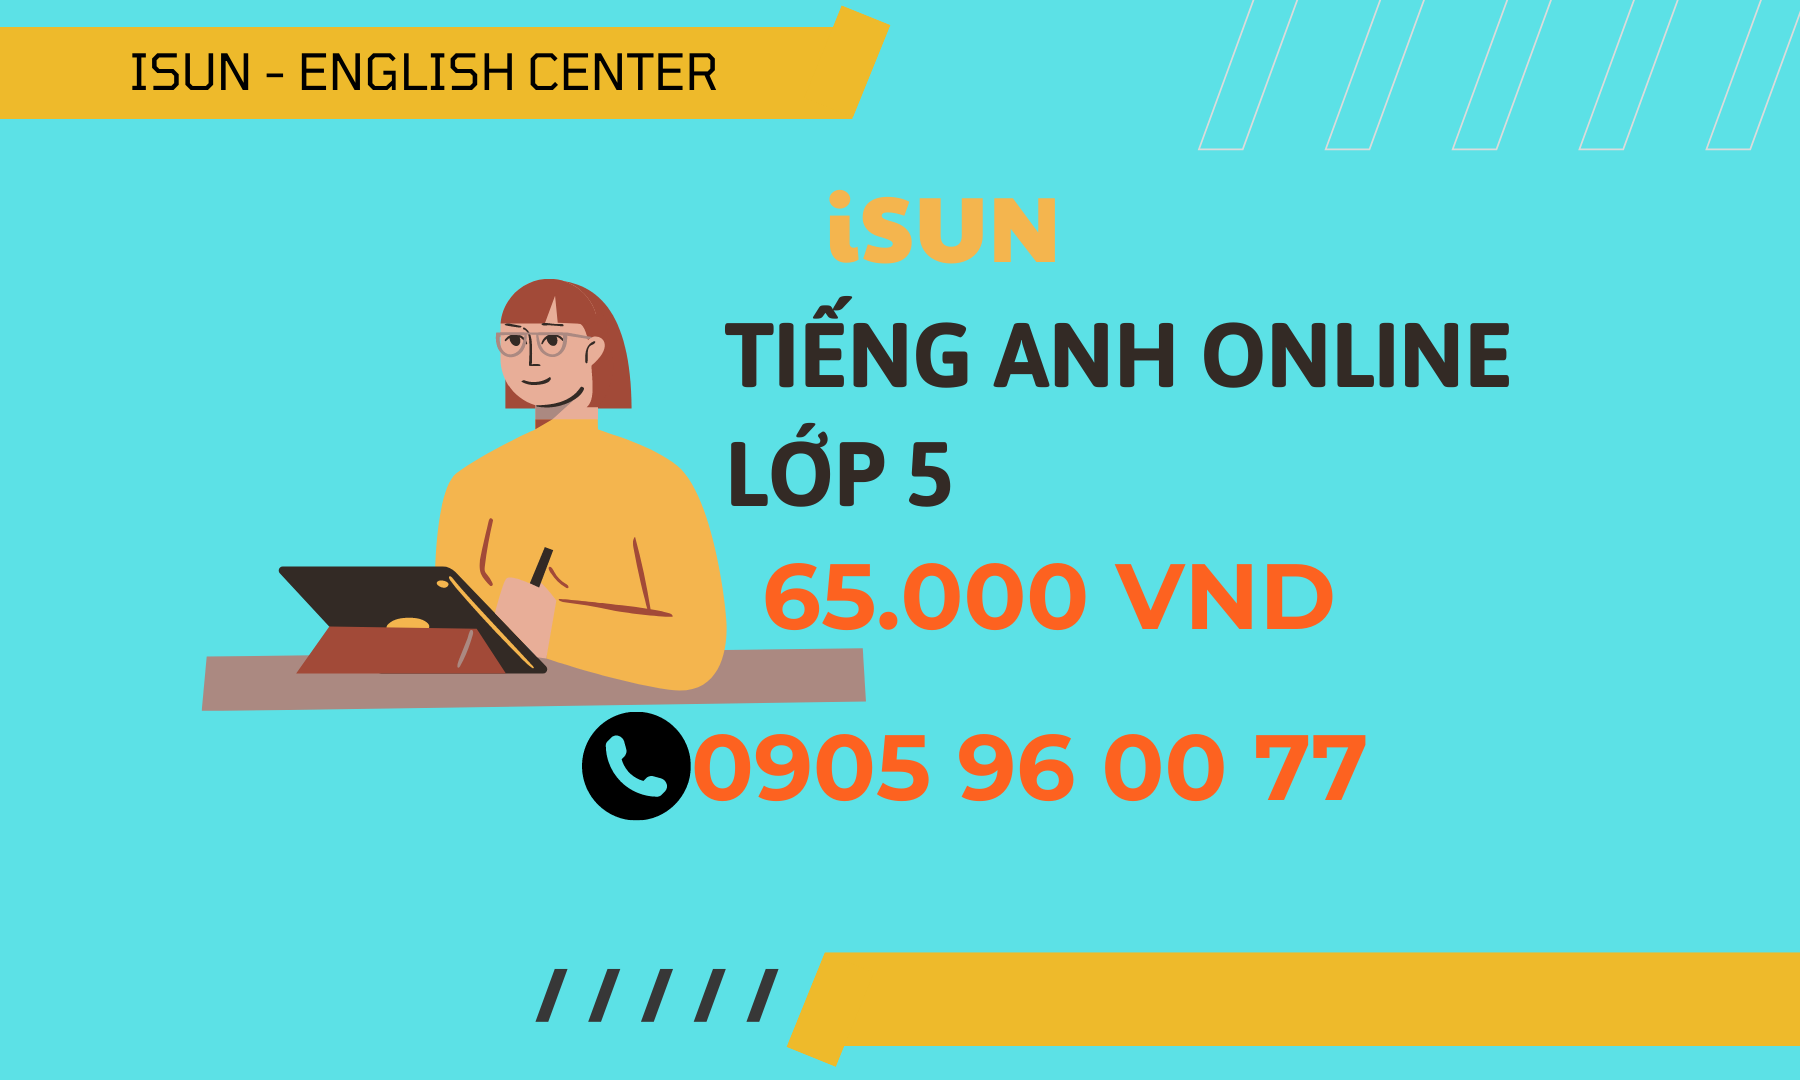 TIẾNG ANH ONLINE LỚP 5